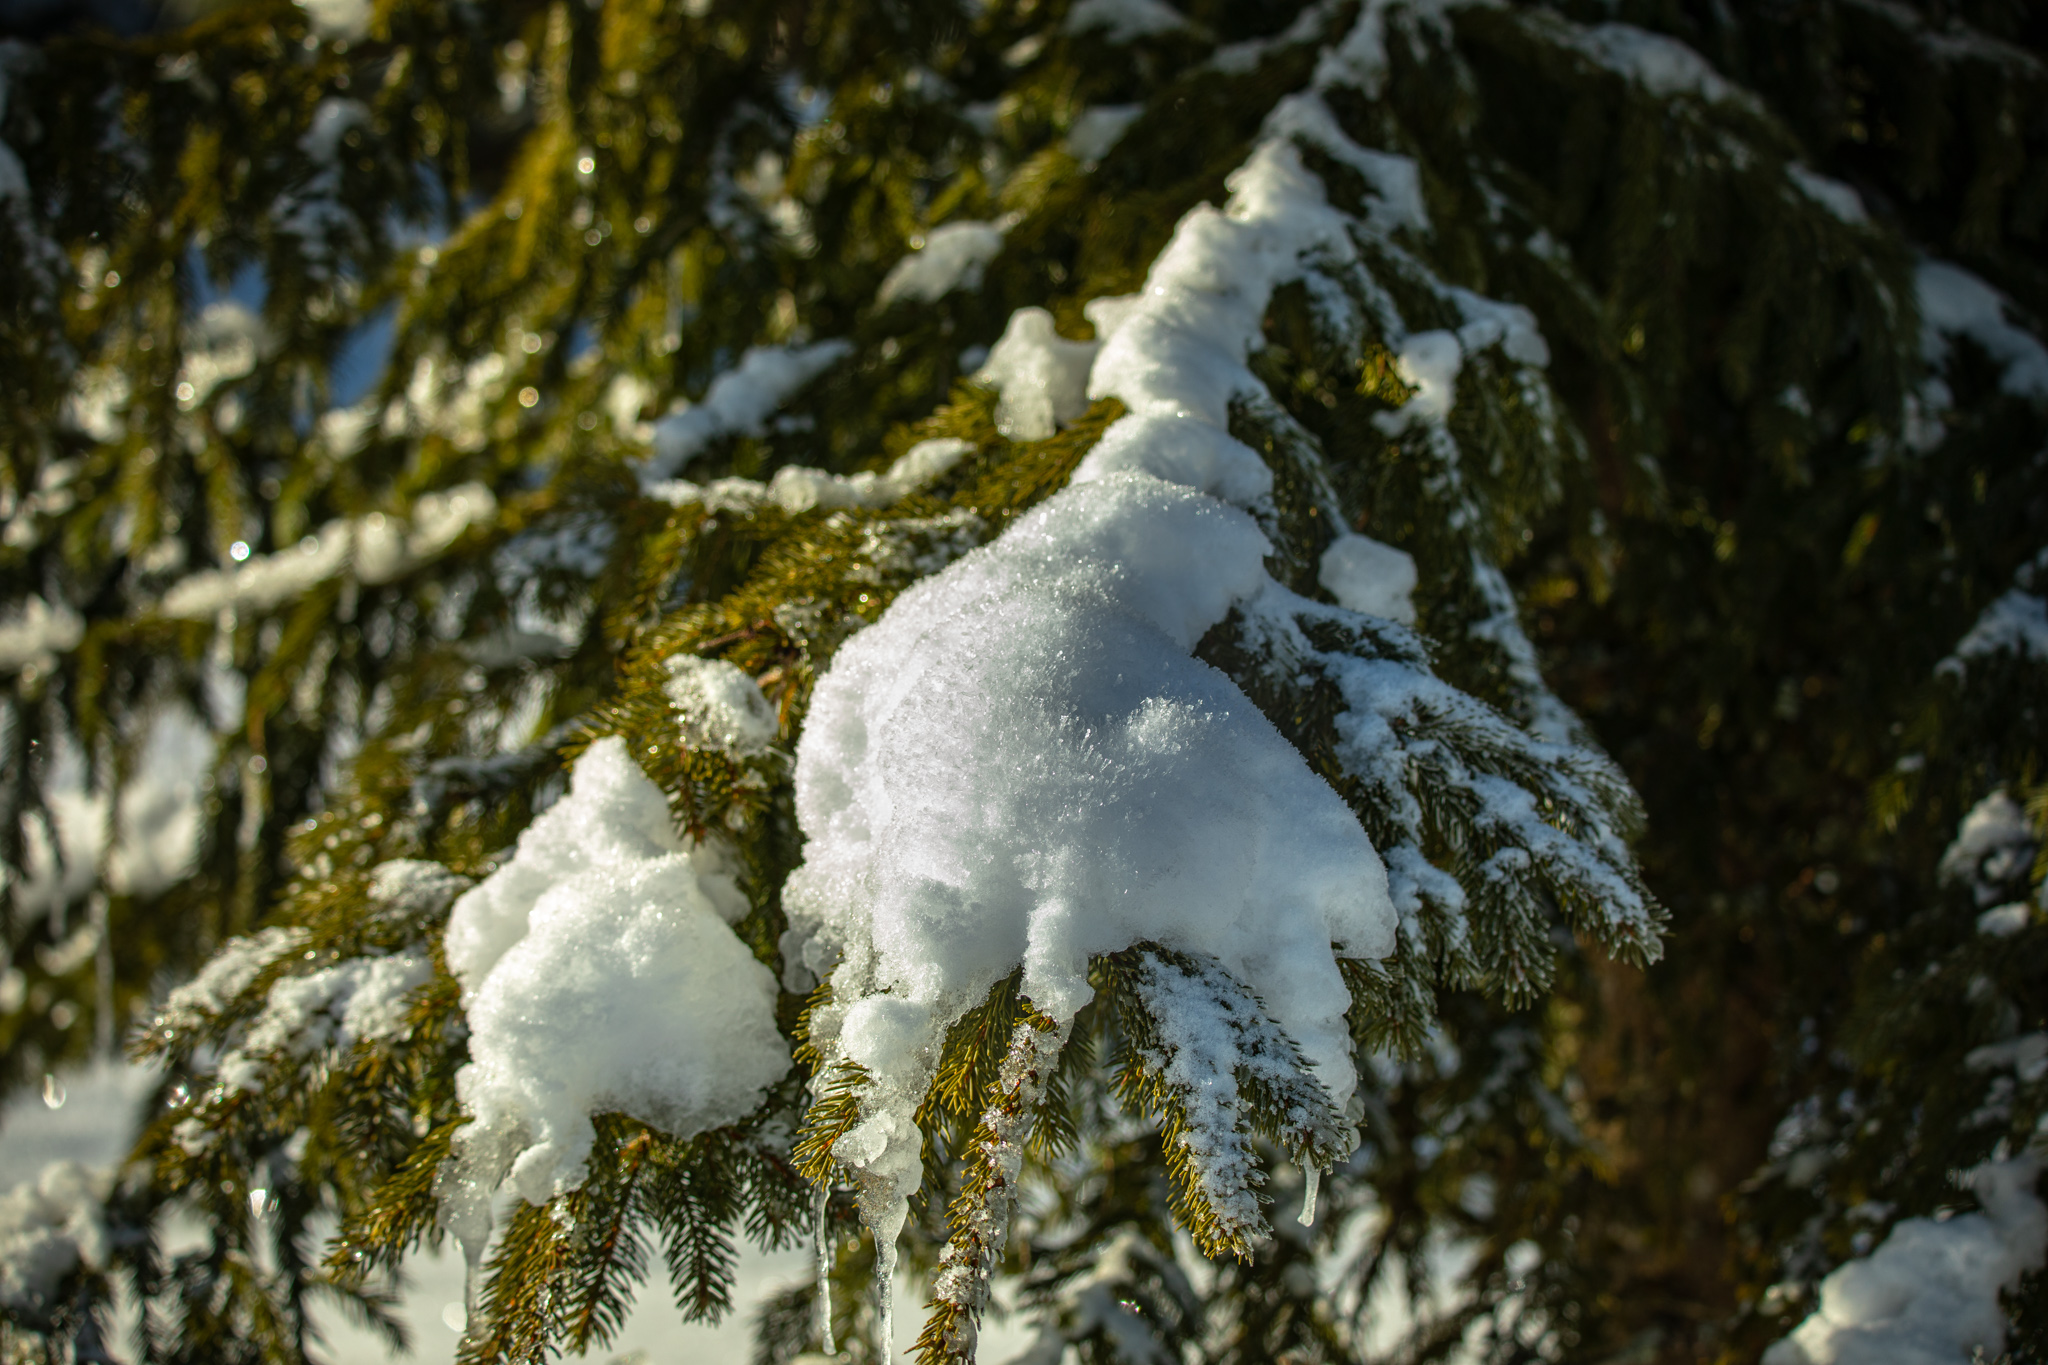 General 2048x1365 photography trees snow ice pine needles outdoors plants greenery nature closeup